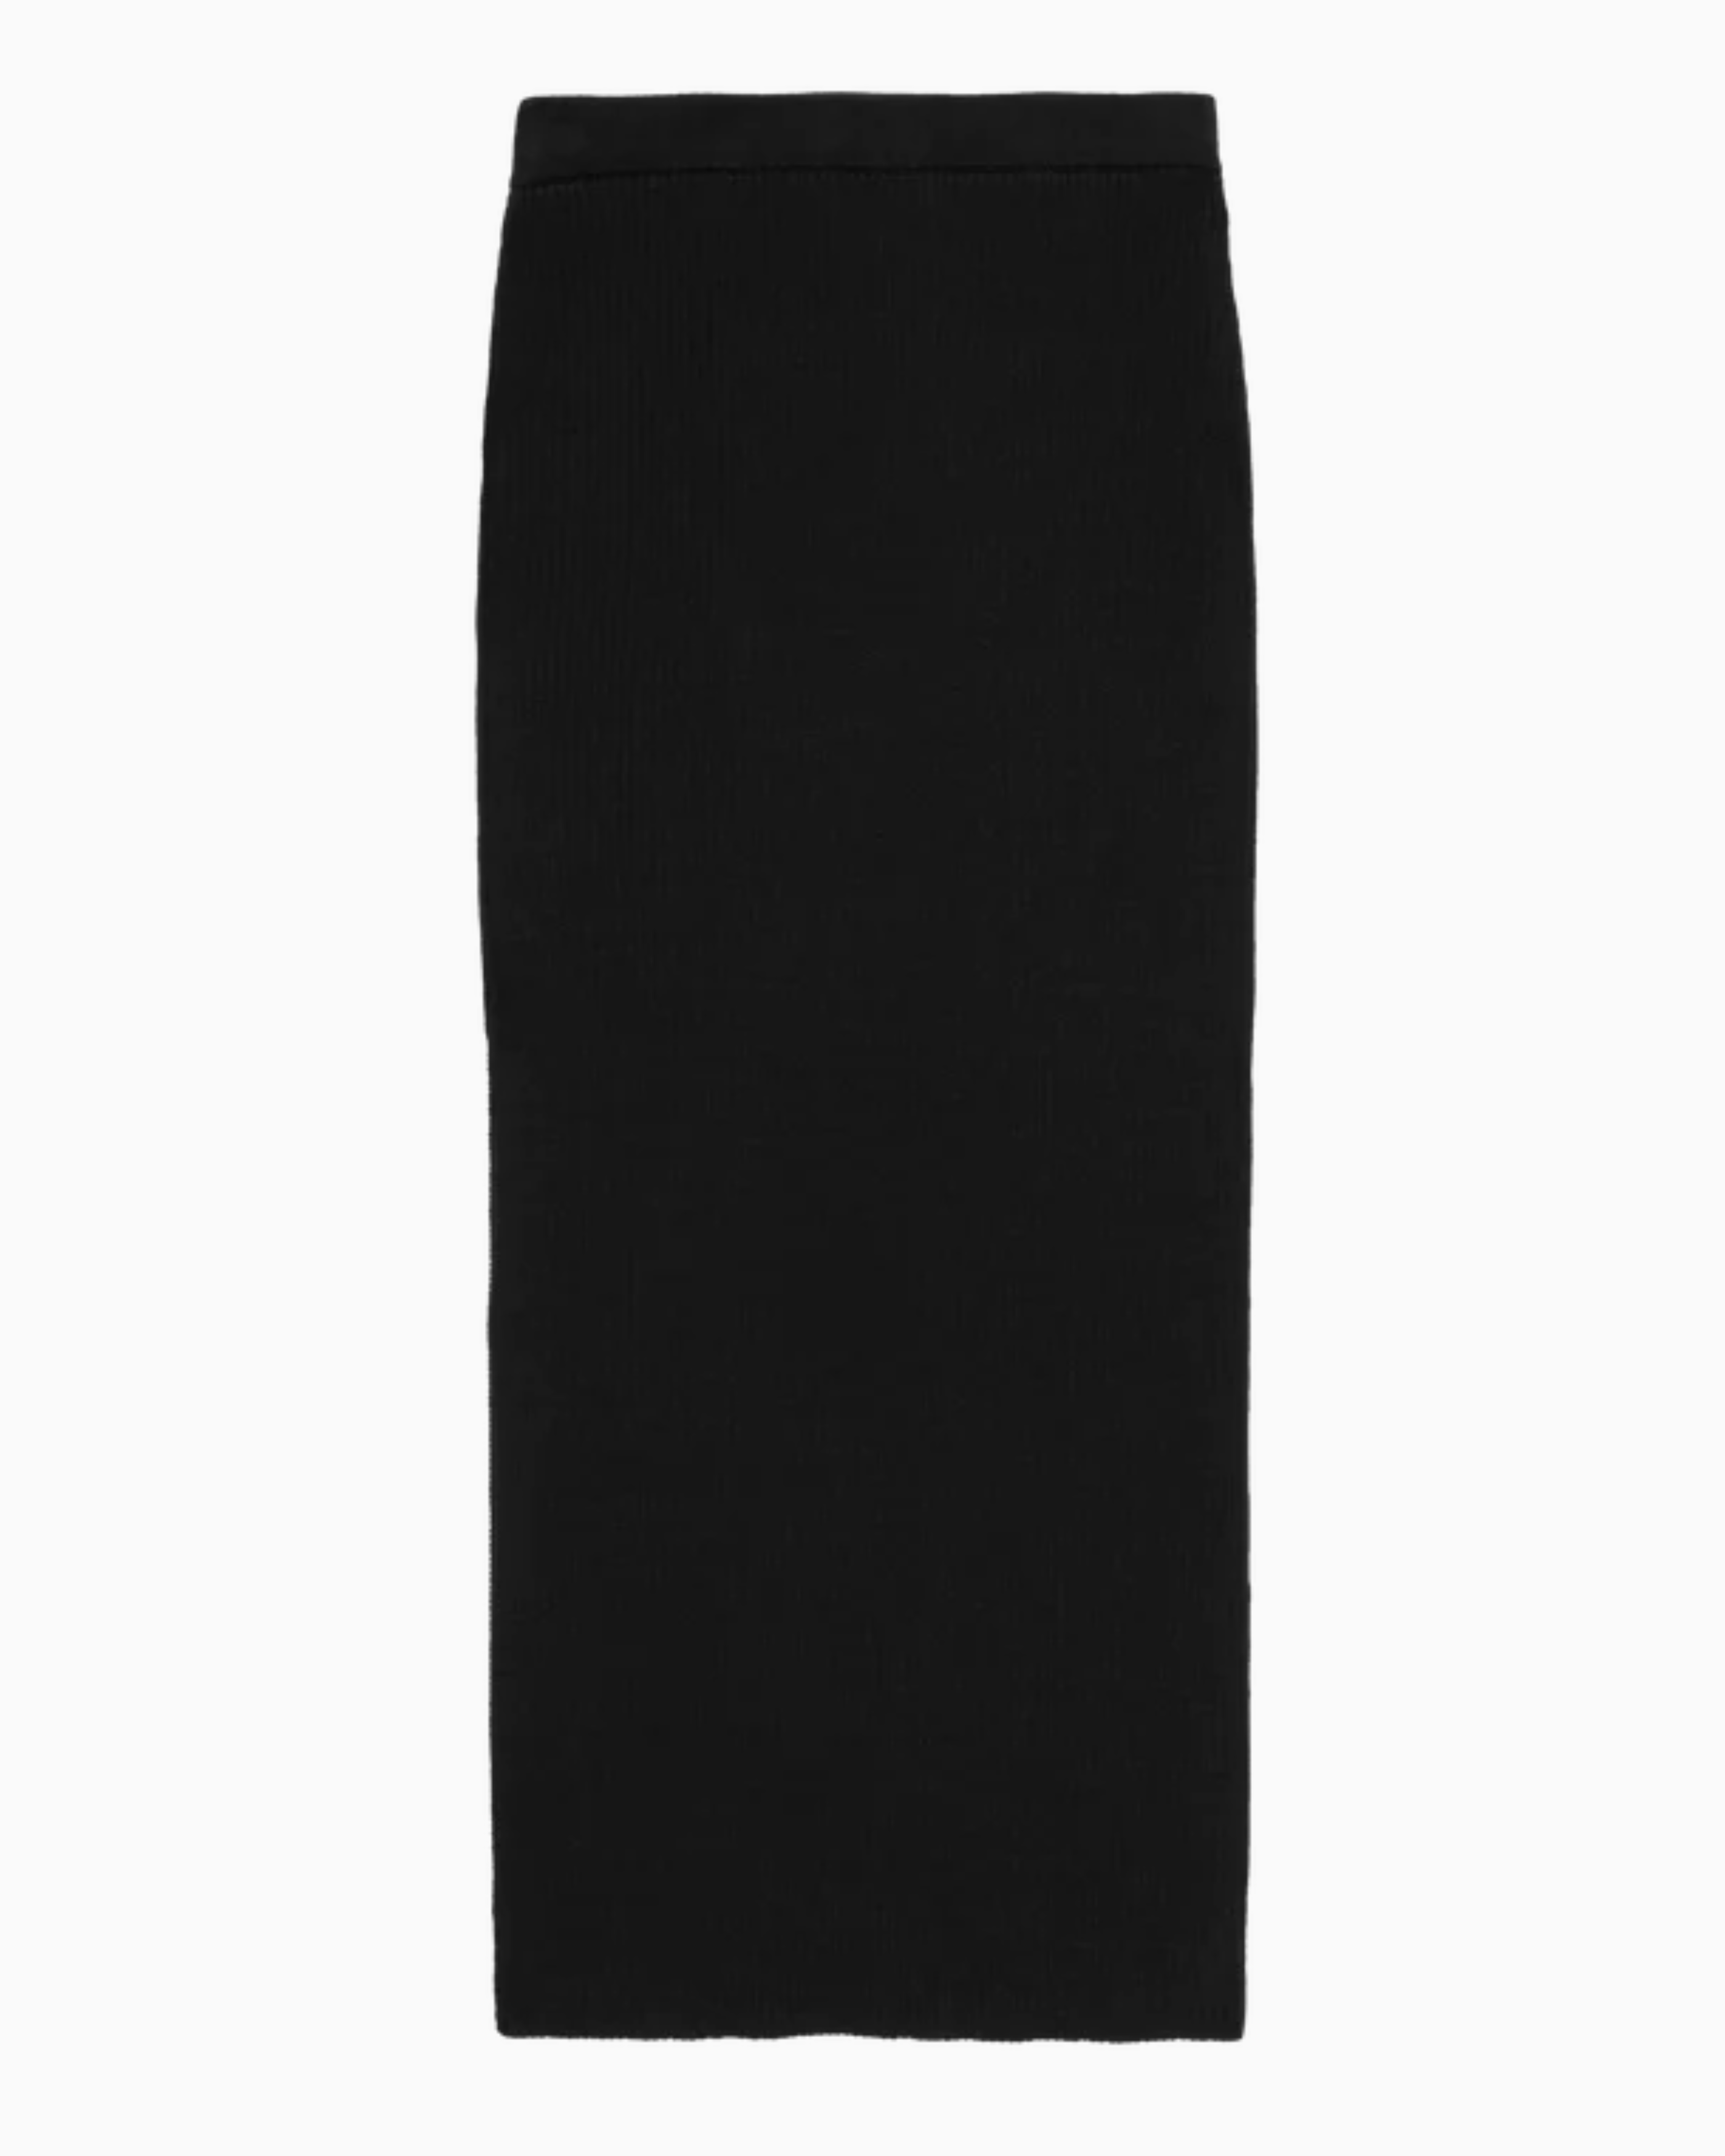 Nation Zion Maxi Skirt with Side Slit in Black